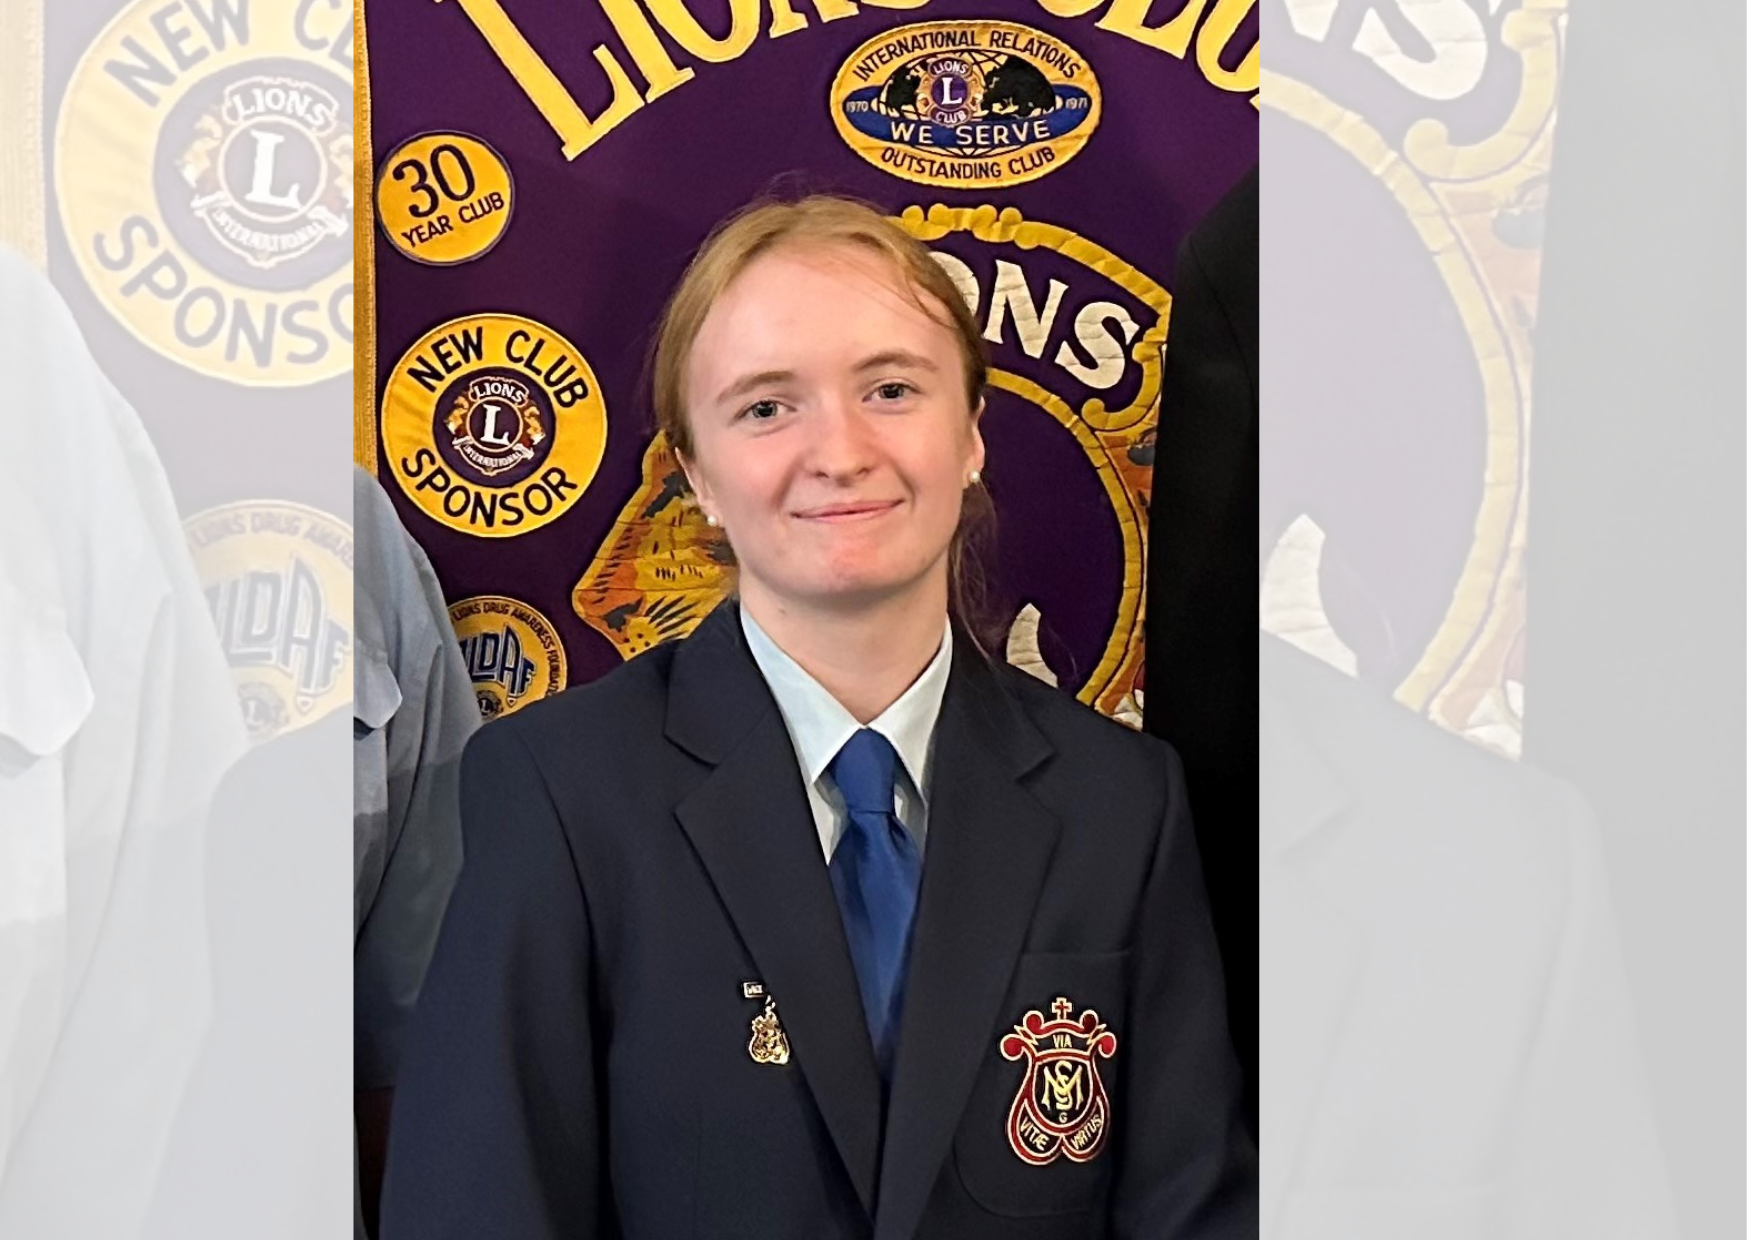 Clare competes with distinction at district level for Lions Youth of the Year